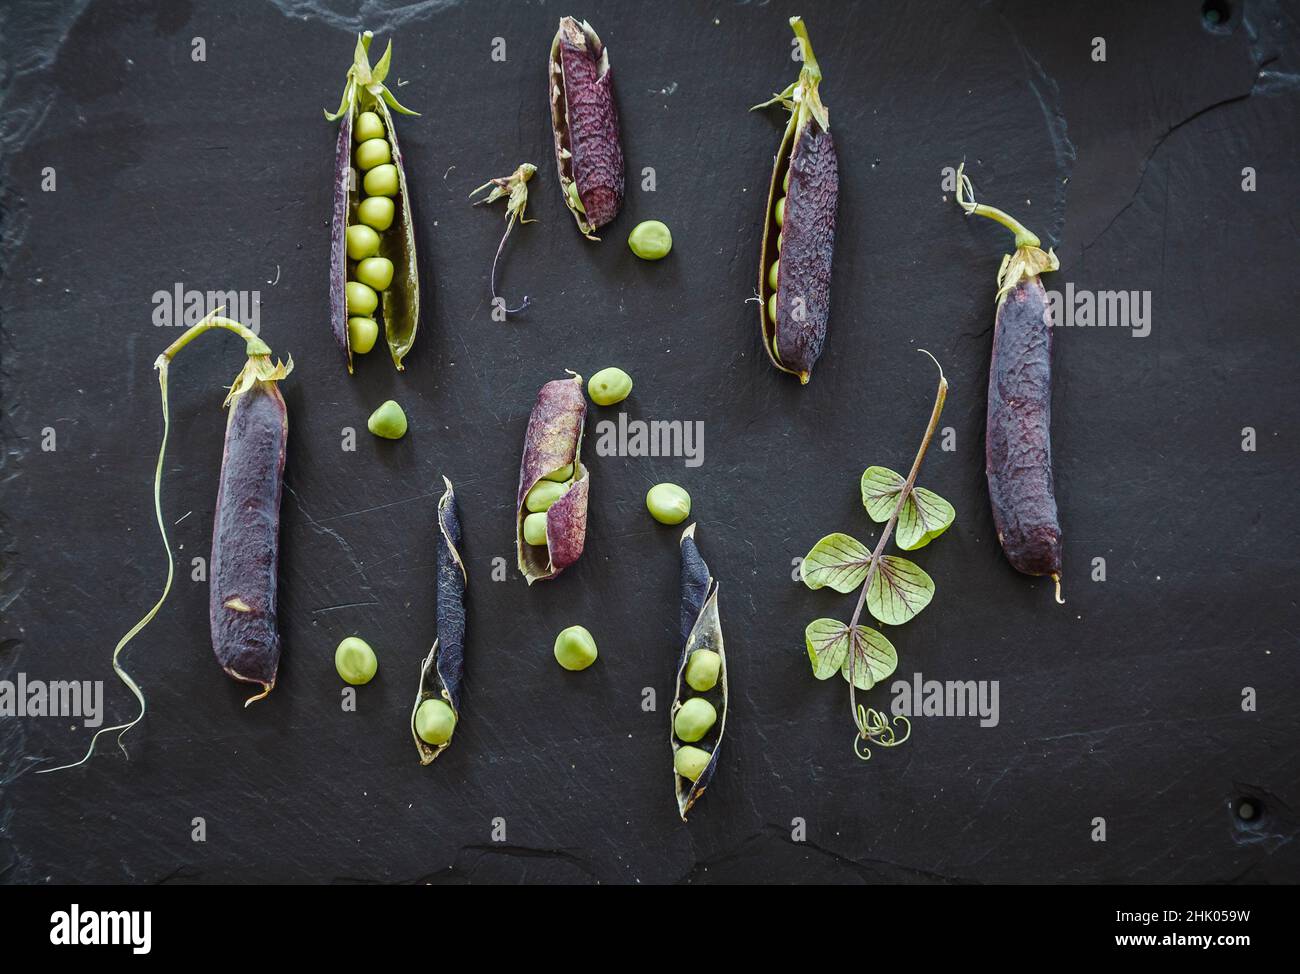 Fresh peas with purple pods on riven slate work surface Stock Photo